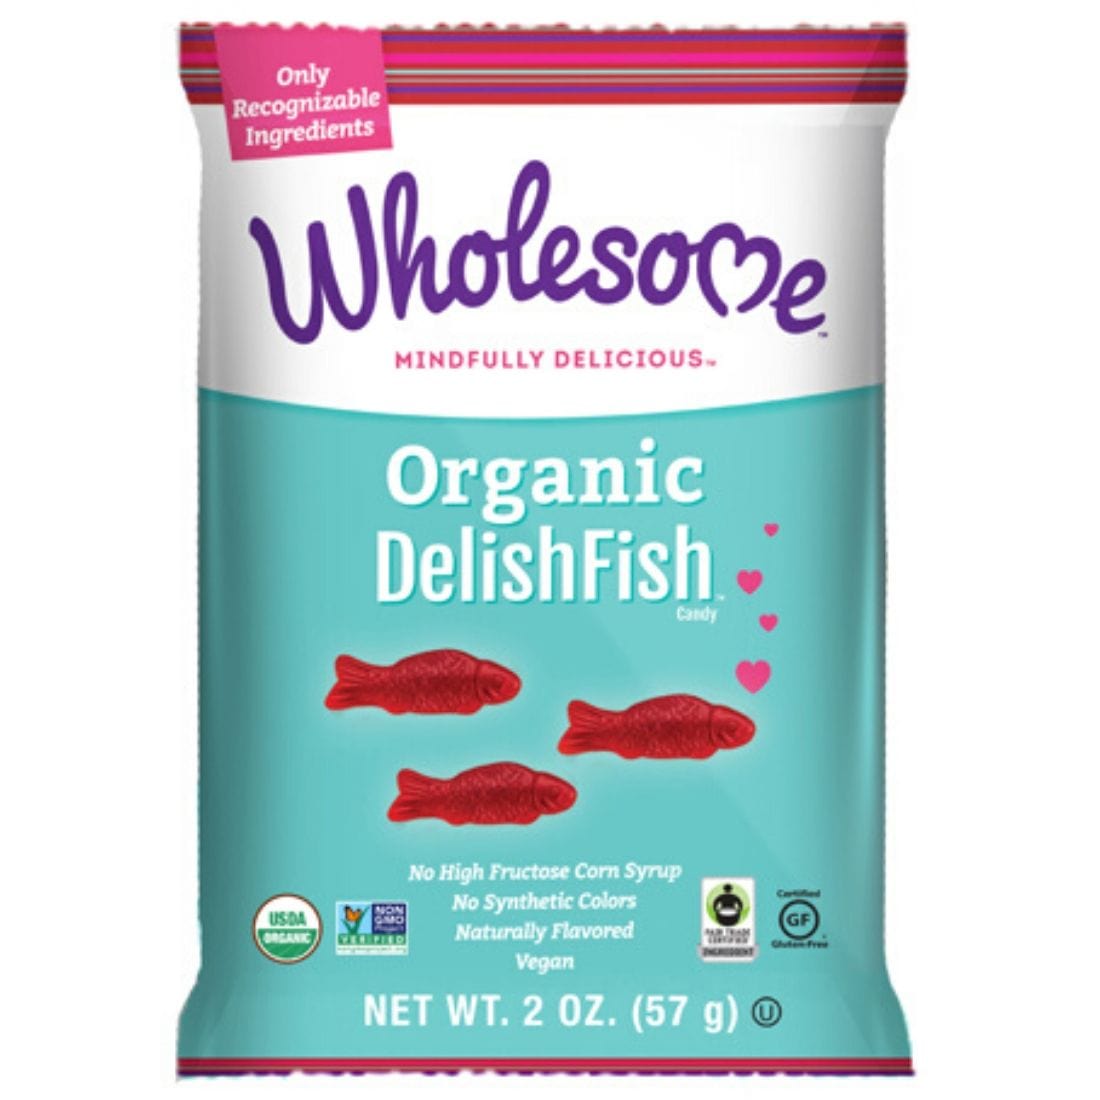 Wholesome (Formerly Surf Sweets) Organic Delish Fish (NEW!)